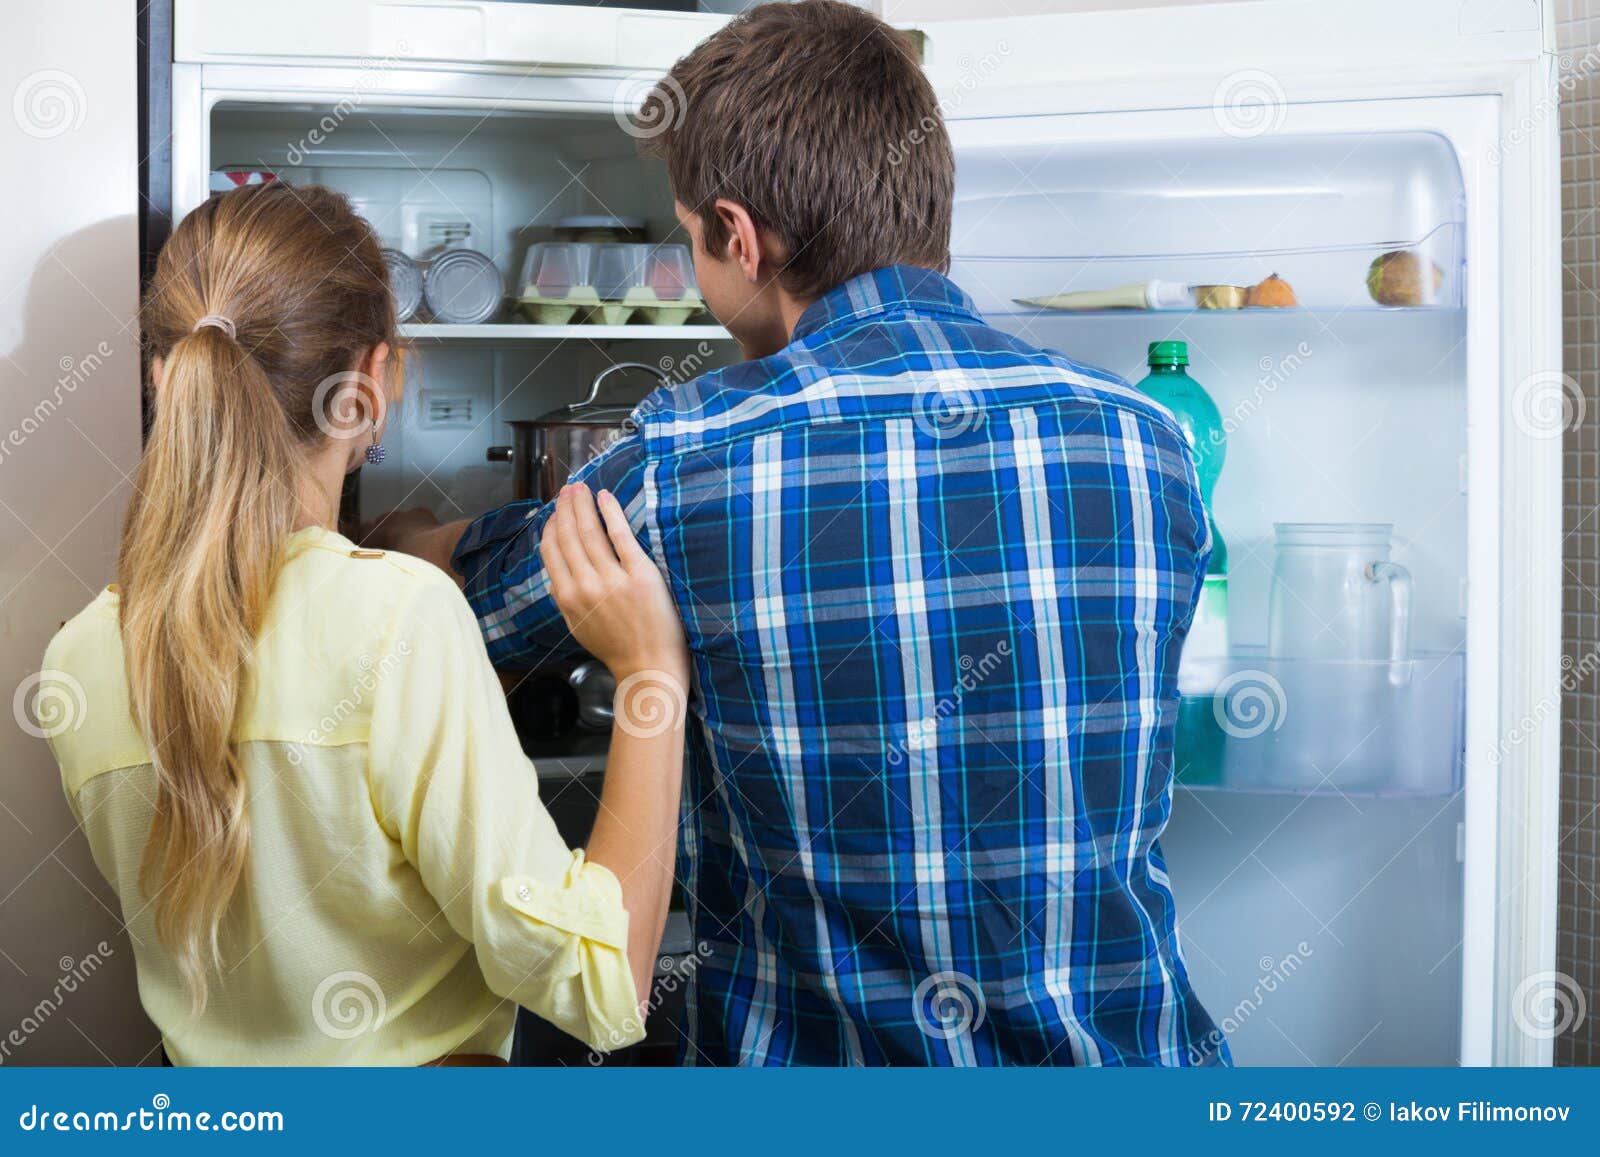 young couple searching food at refrigerator